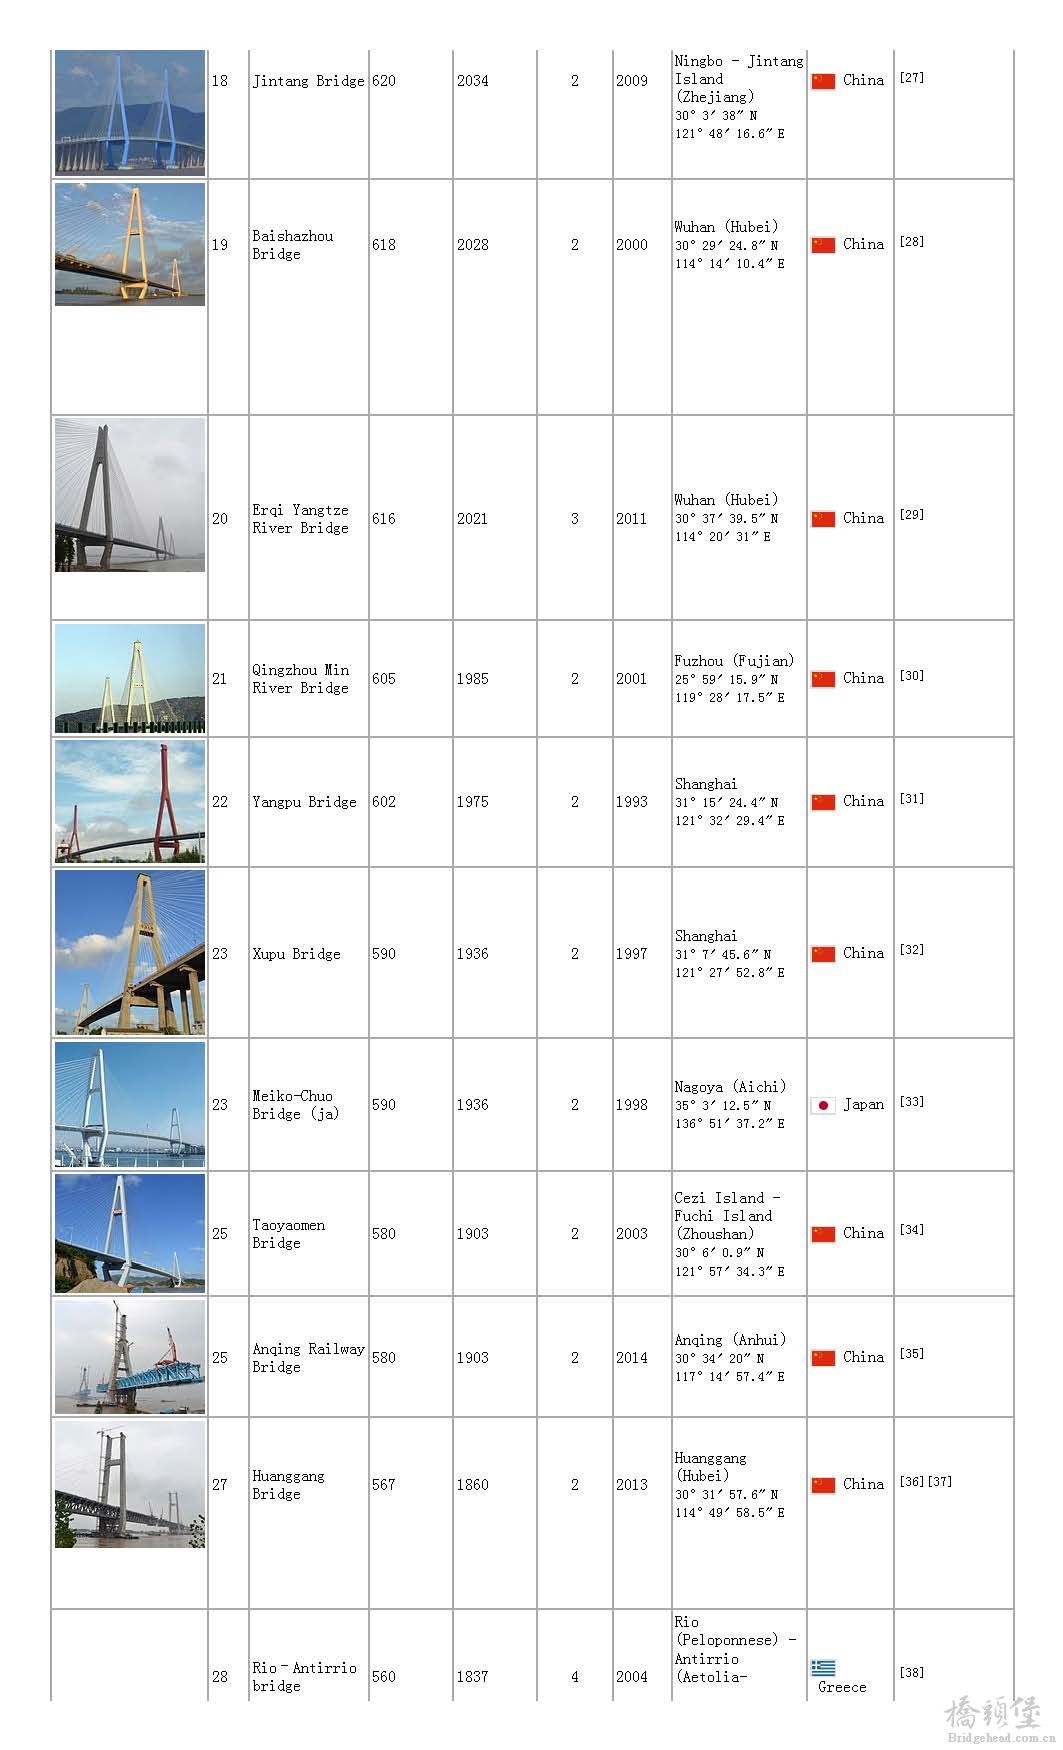 List of longest cable-stayed bridge spans - Wikipedia, the free encyclopedia_页面_03.jpg